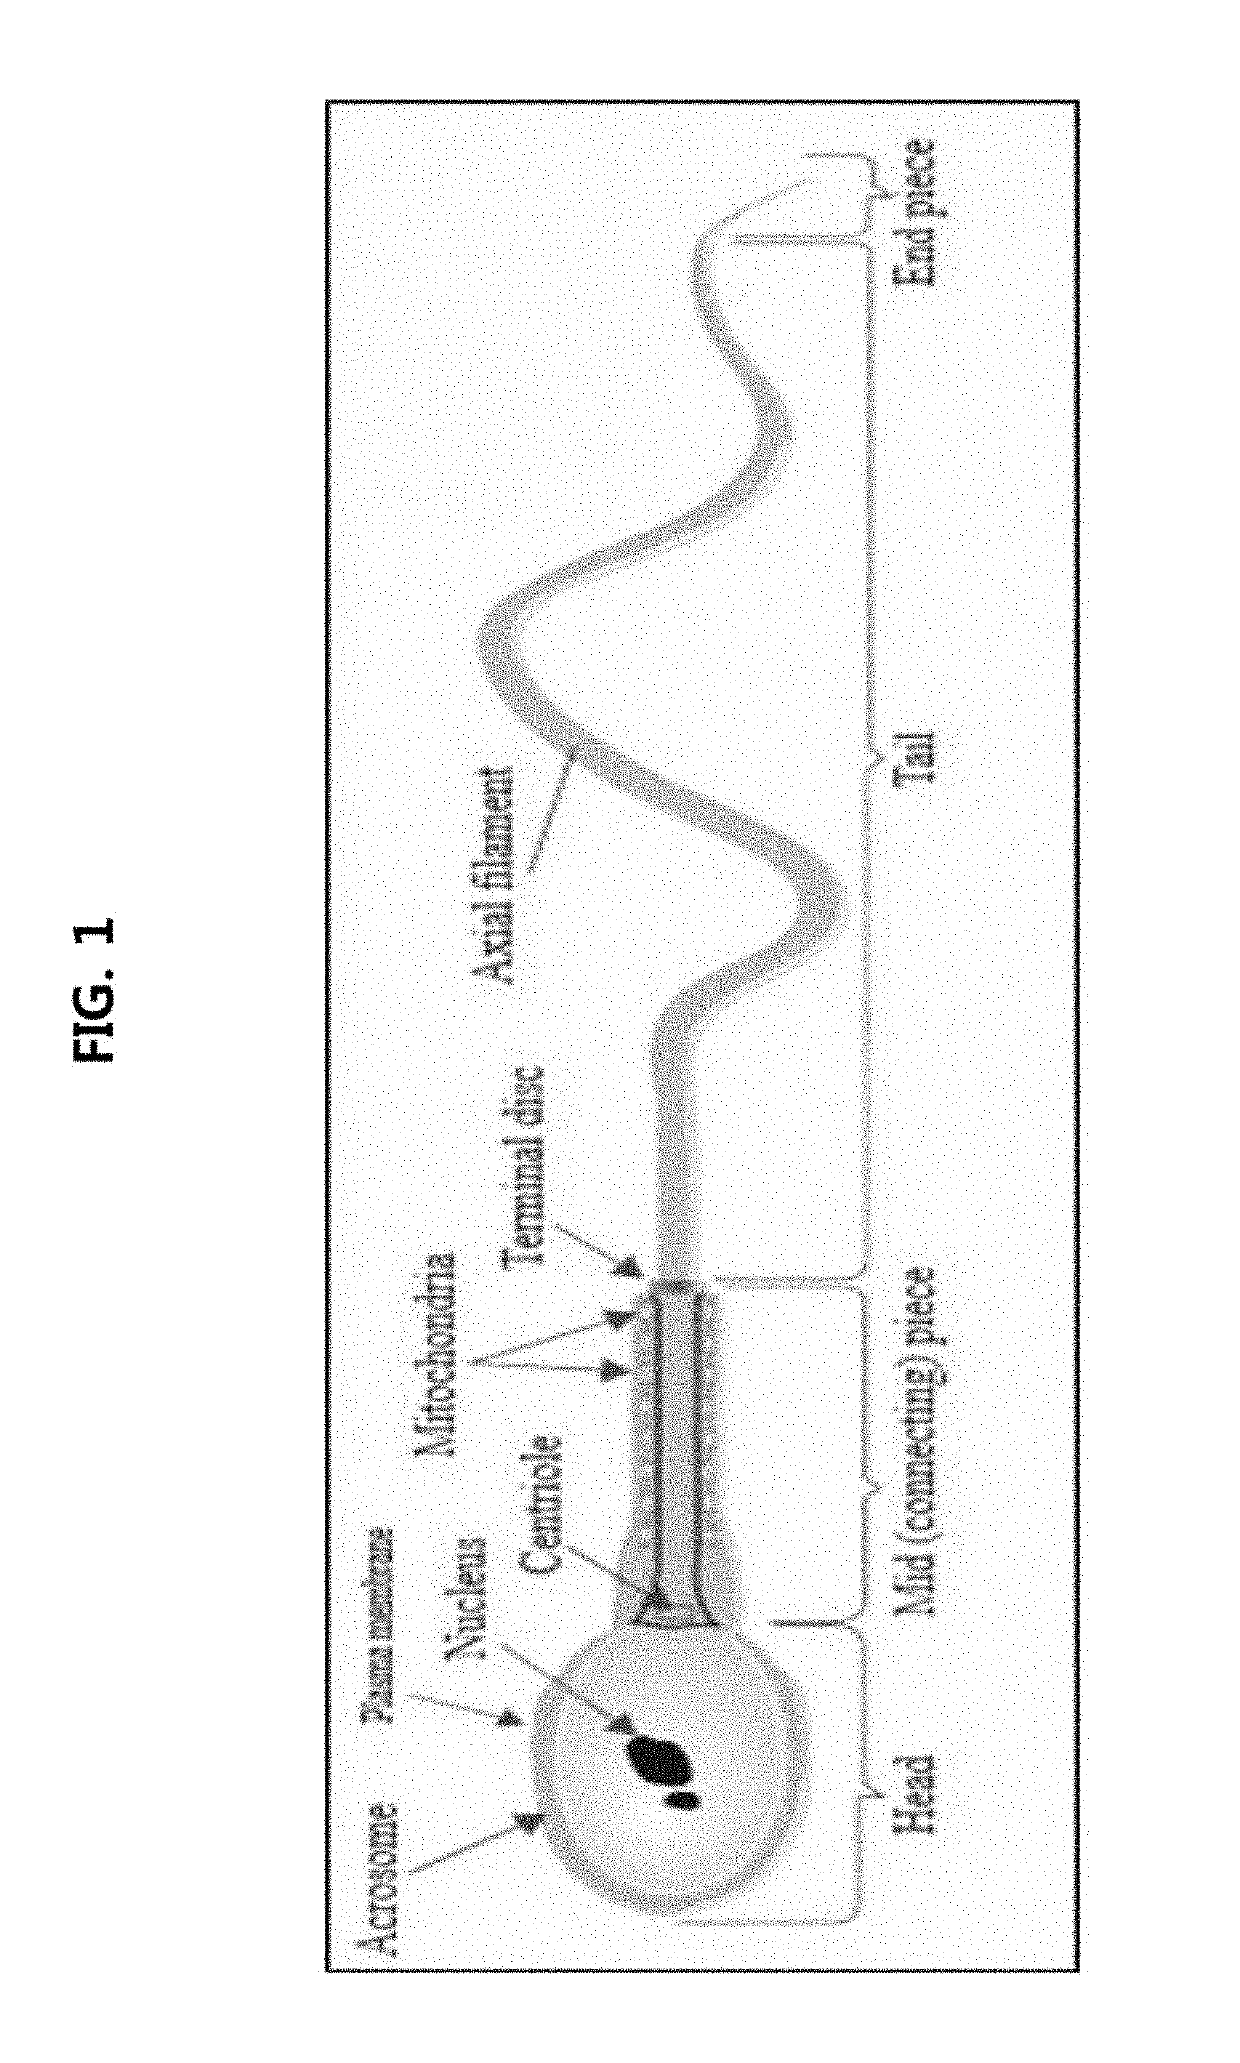 Method, apparatus and kit for human identification using polymer filter means for separation of sperm cells from biological samples that include other cell types